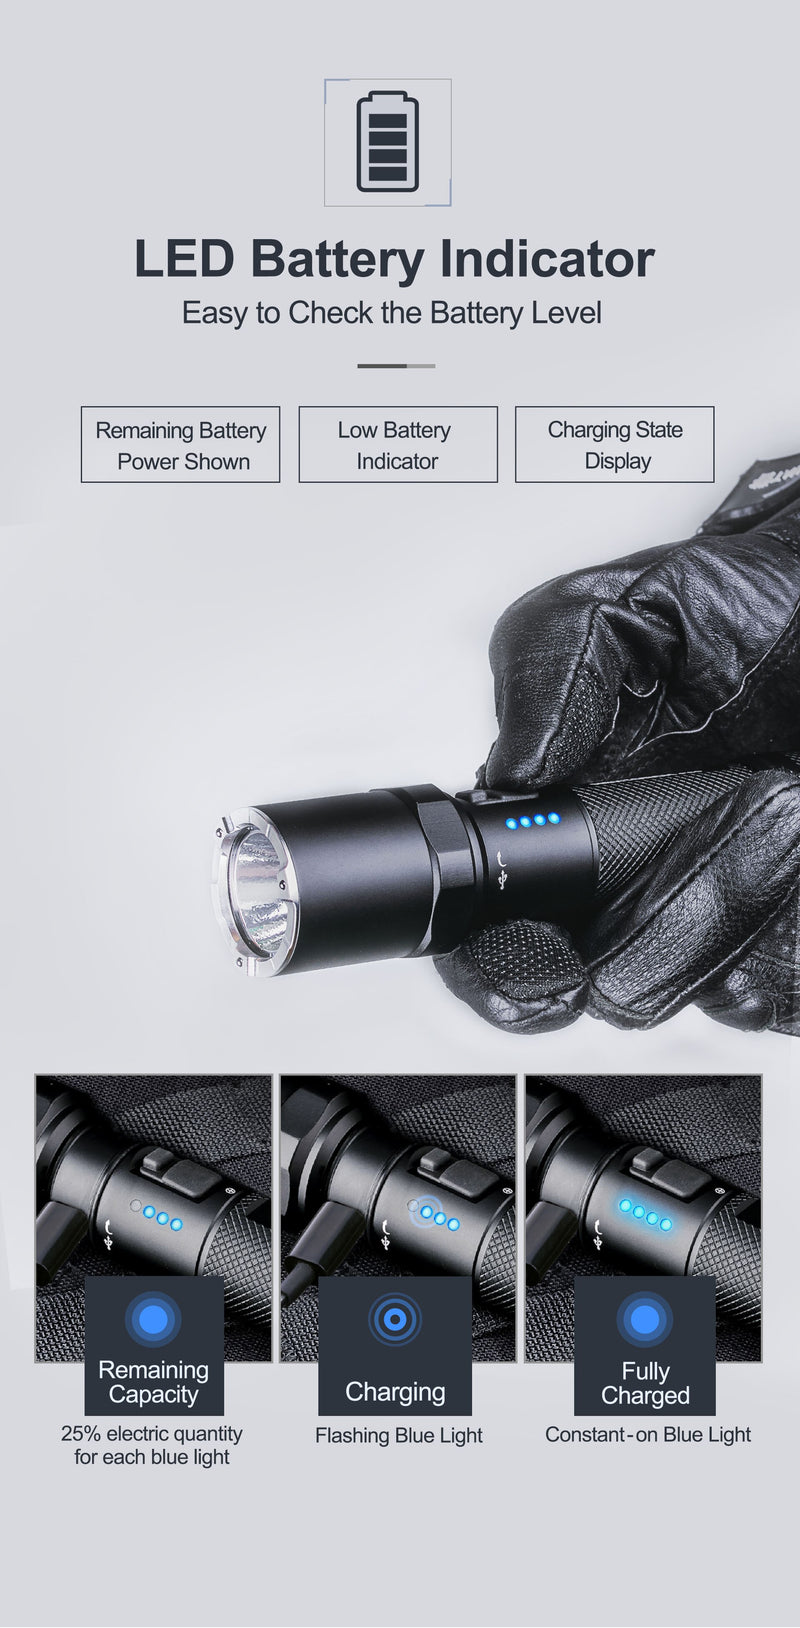 1300 Lumens 18650 Tactical Flashlight USB High Power Rechargeable Led Flashlight Torch